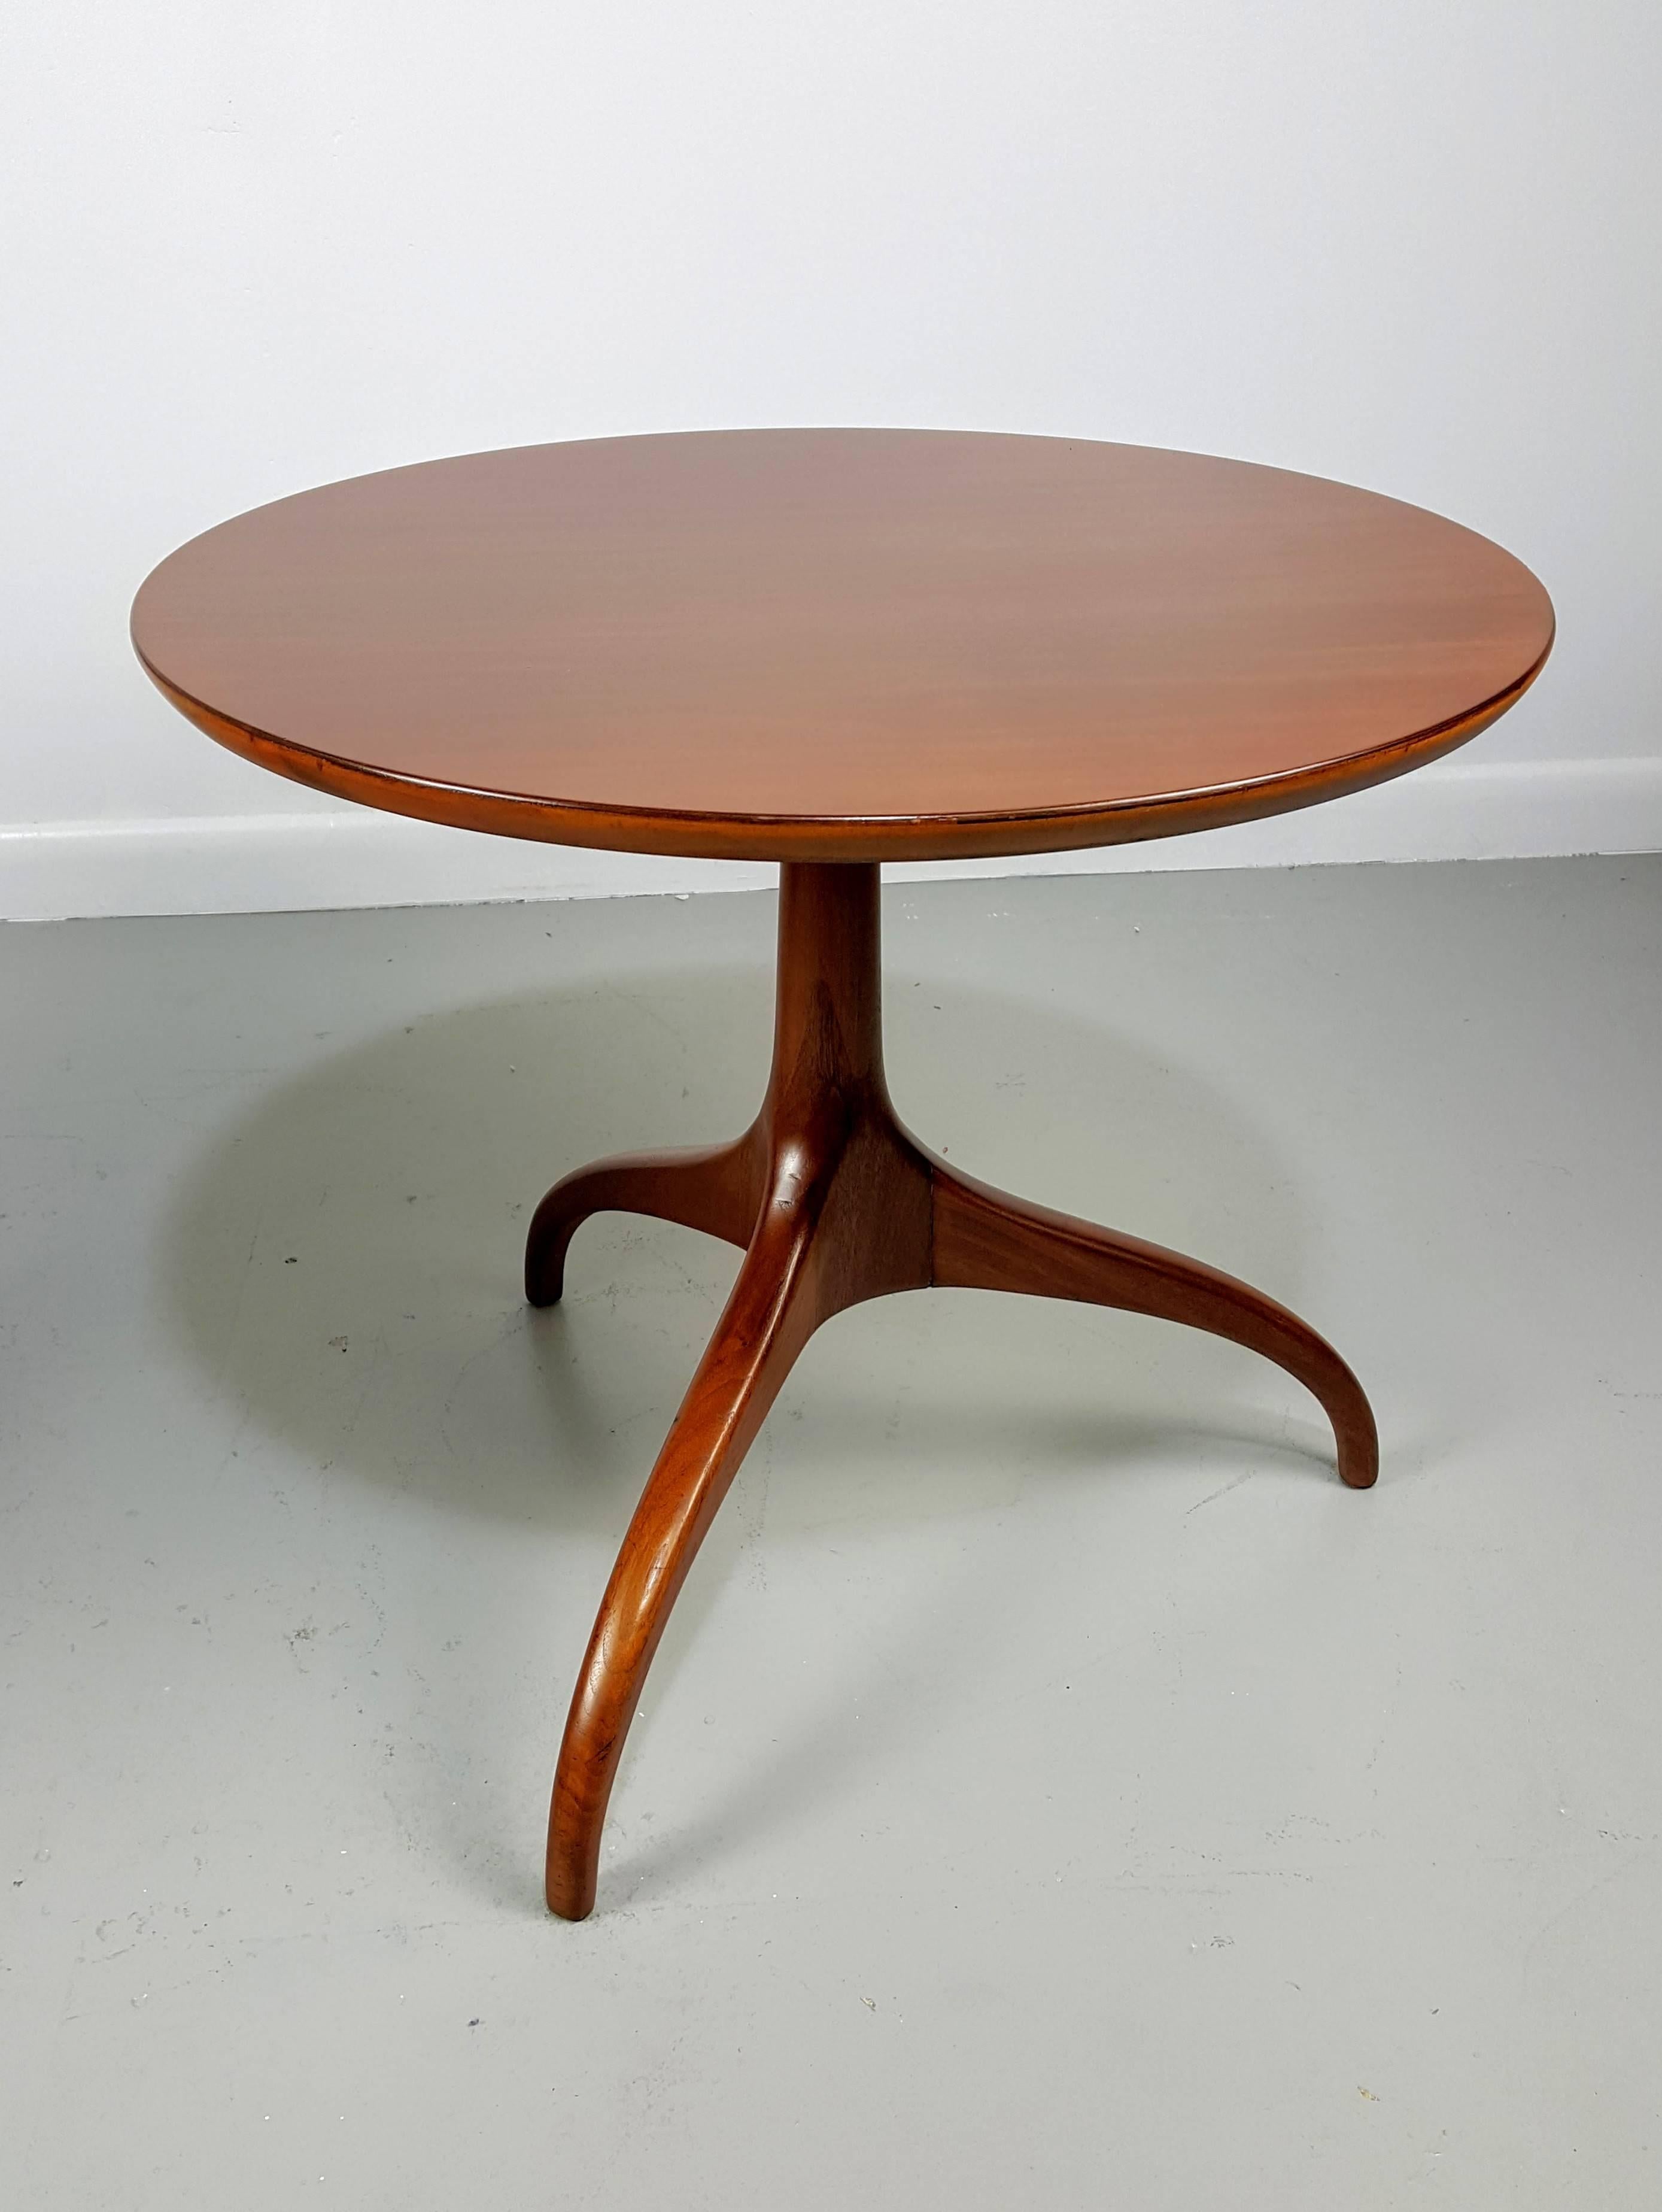 Sculptural pair of walnut side tables with wishbone base by Heritage Henredon, circa 1960. The design is absolutely stunning. Scale and quality of give these tables a commanding presence in any room. Fully restored and in excellent condition. Top is